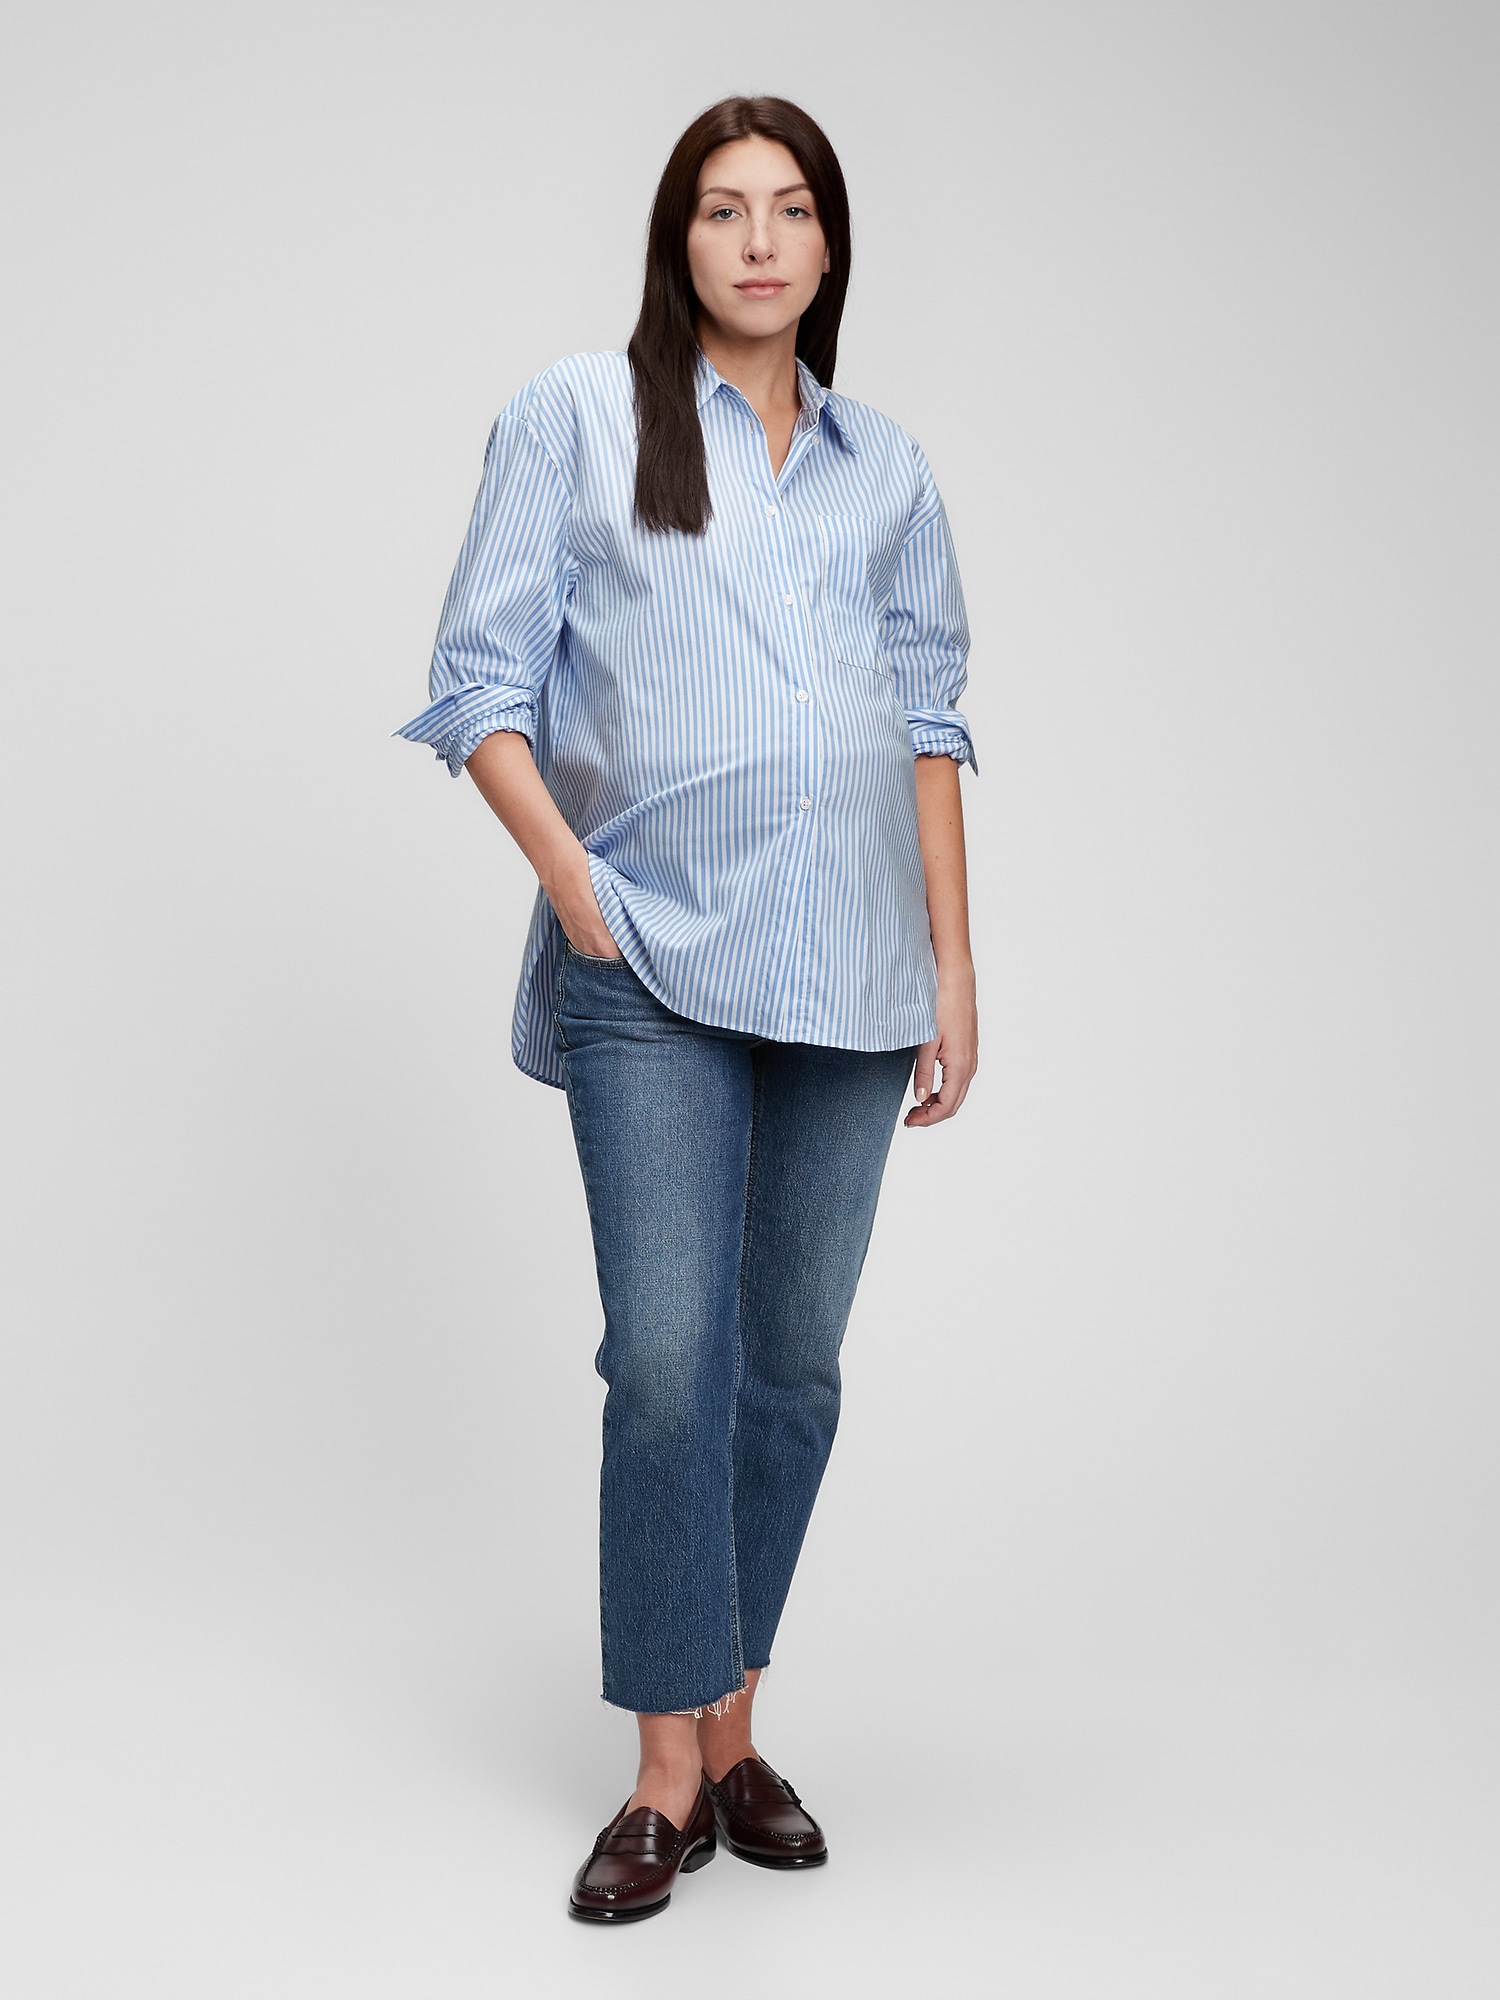 Cropped Button-Down Shirt in Blue, Red and Tan Chambray Color